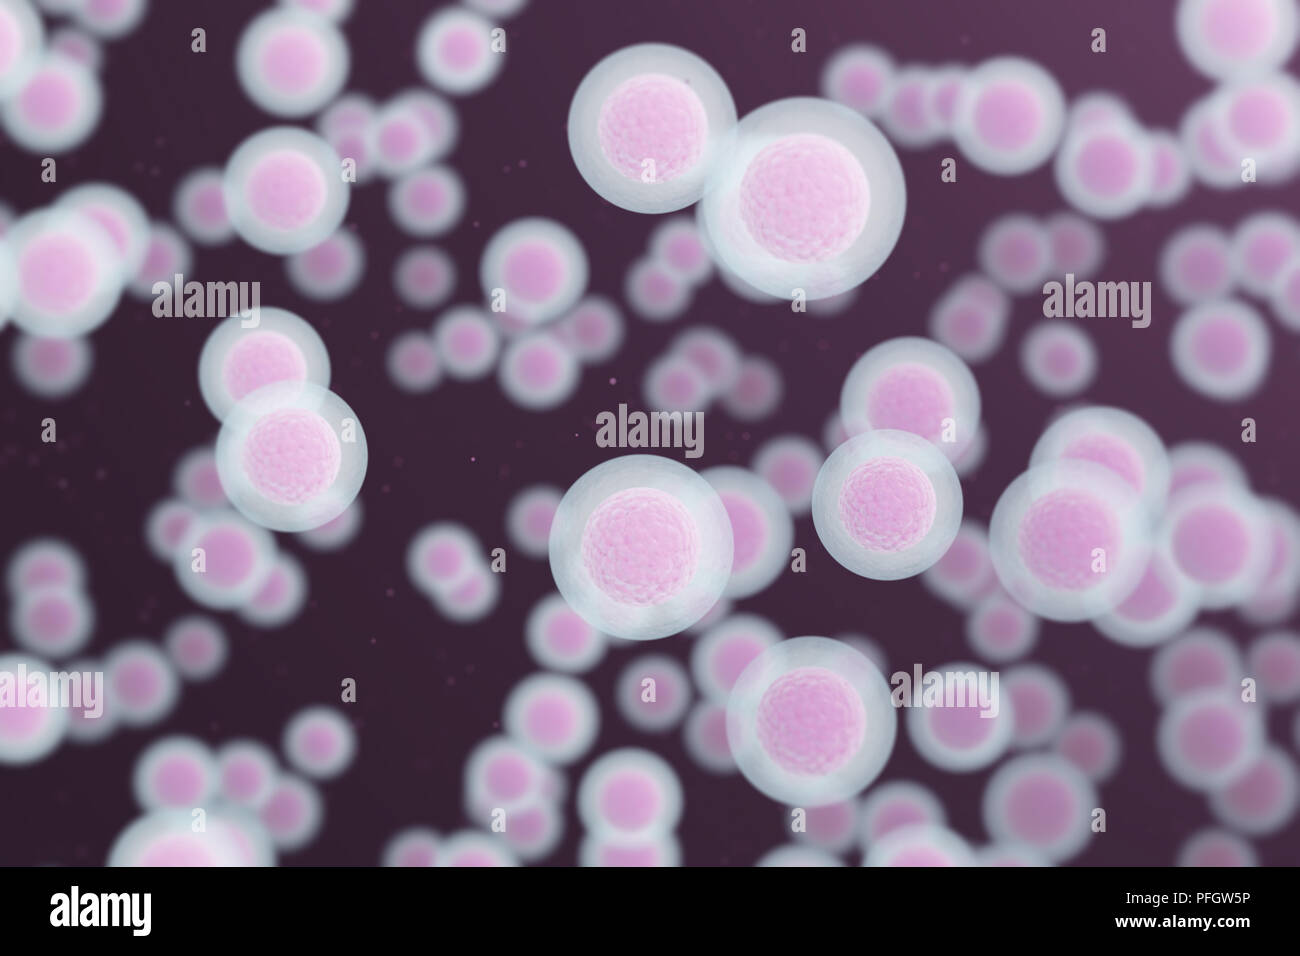 Human cells background science and medical background Stock Photo